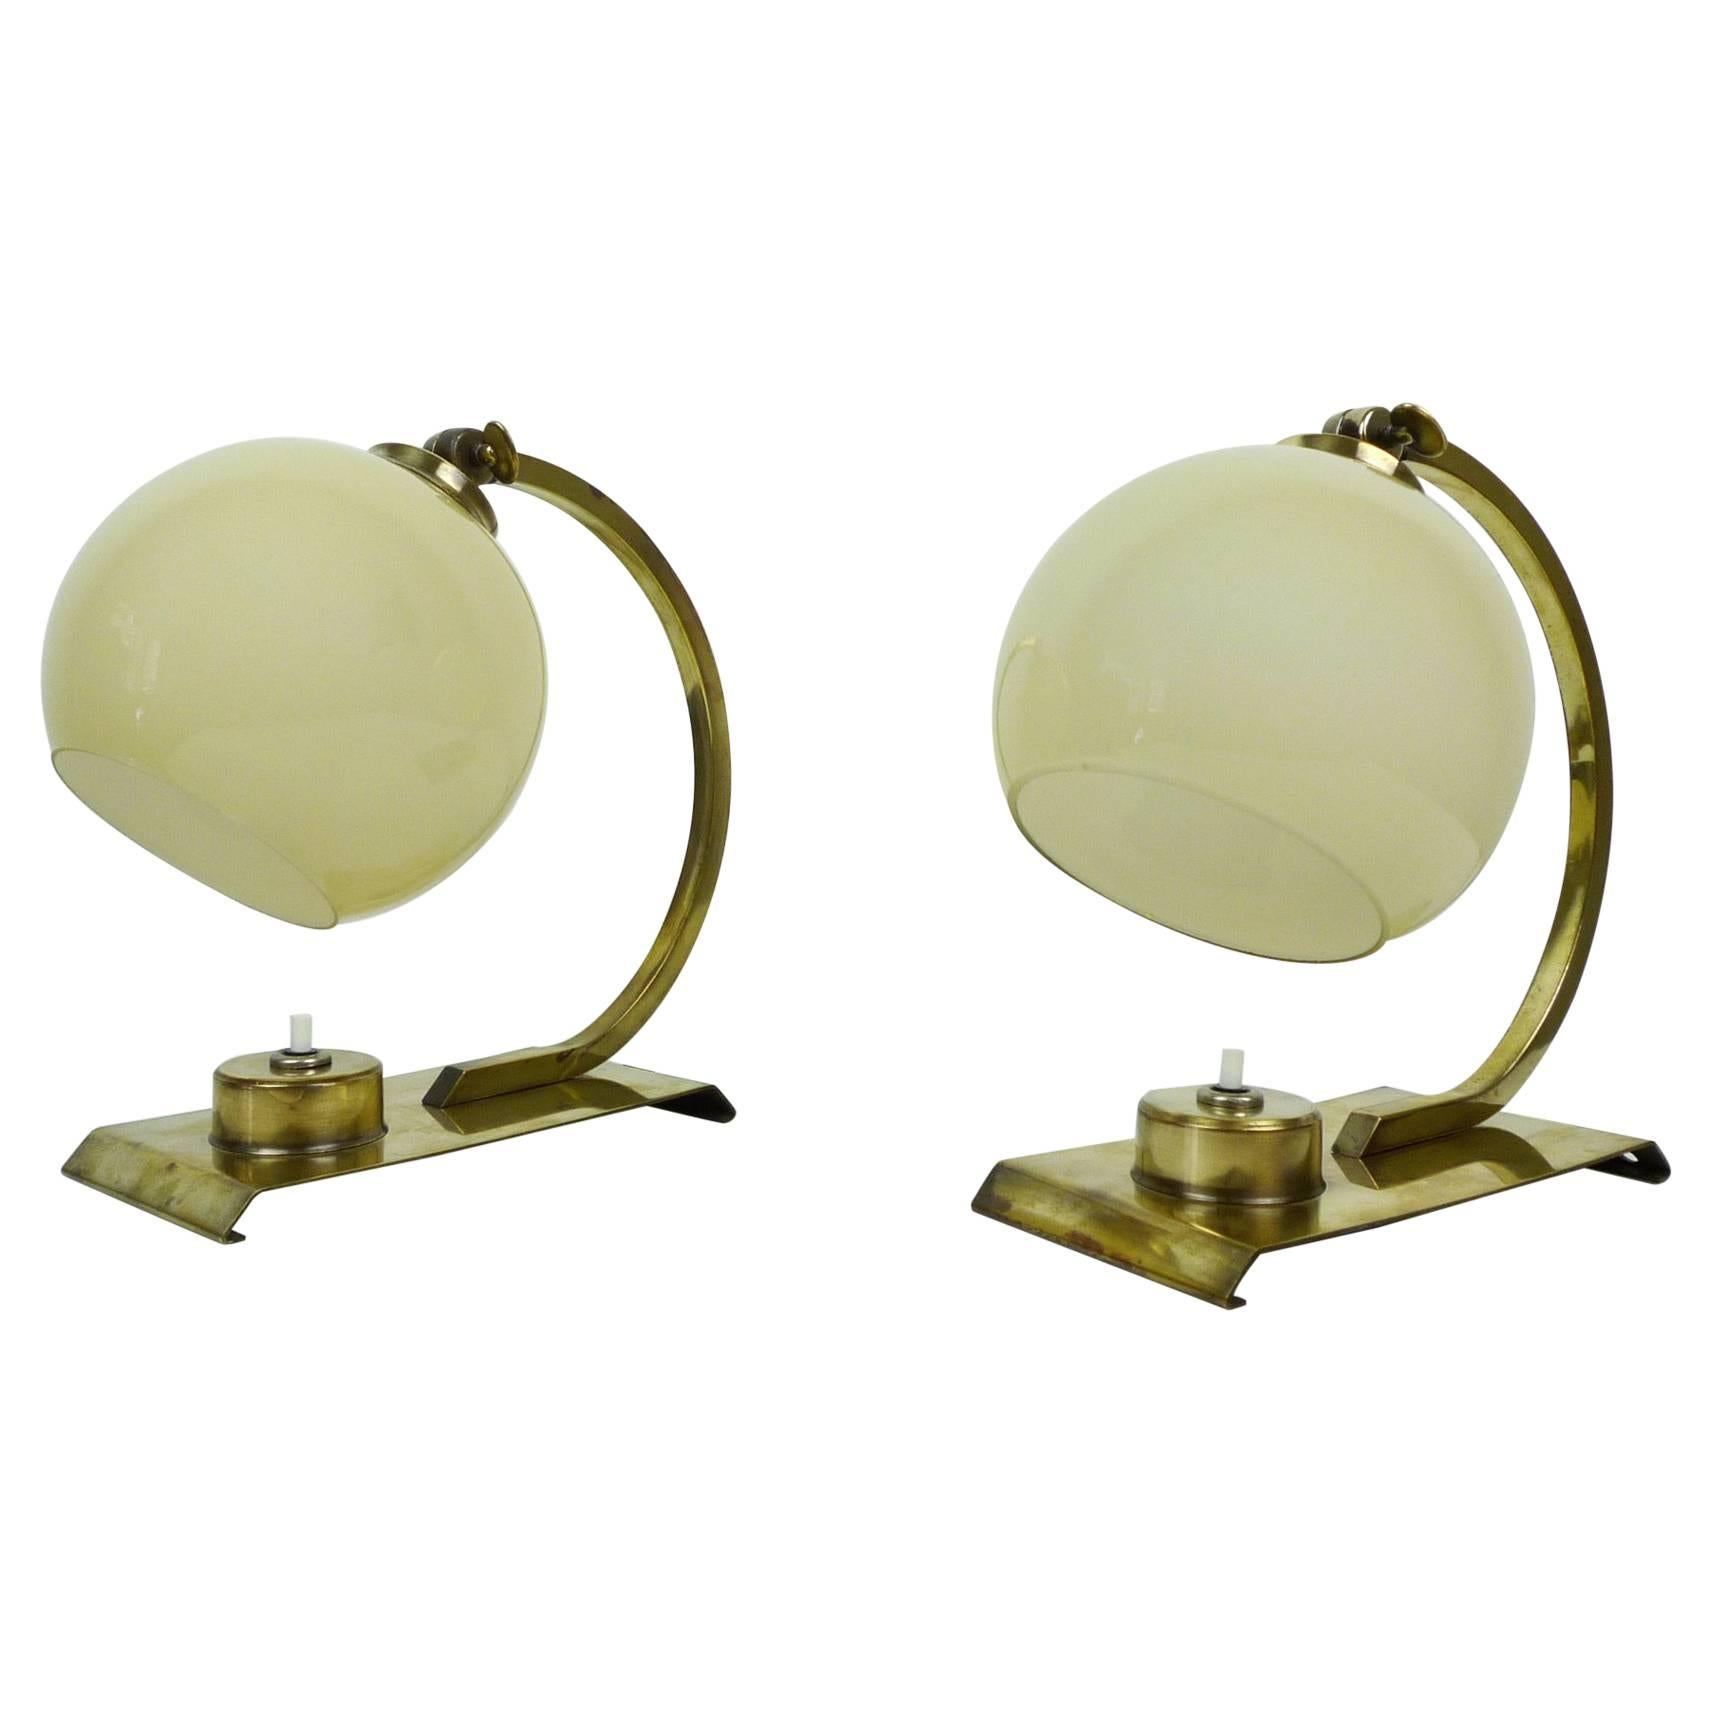 Pair of Art Deco Table Lamps from France, 1930s